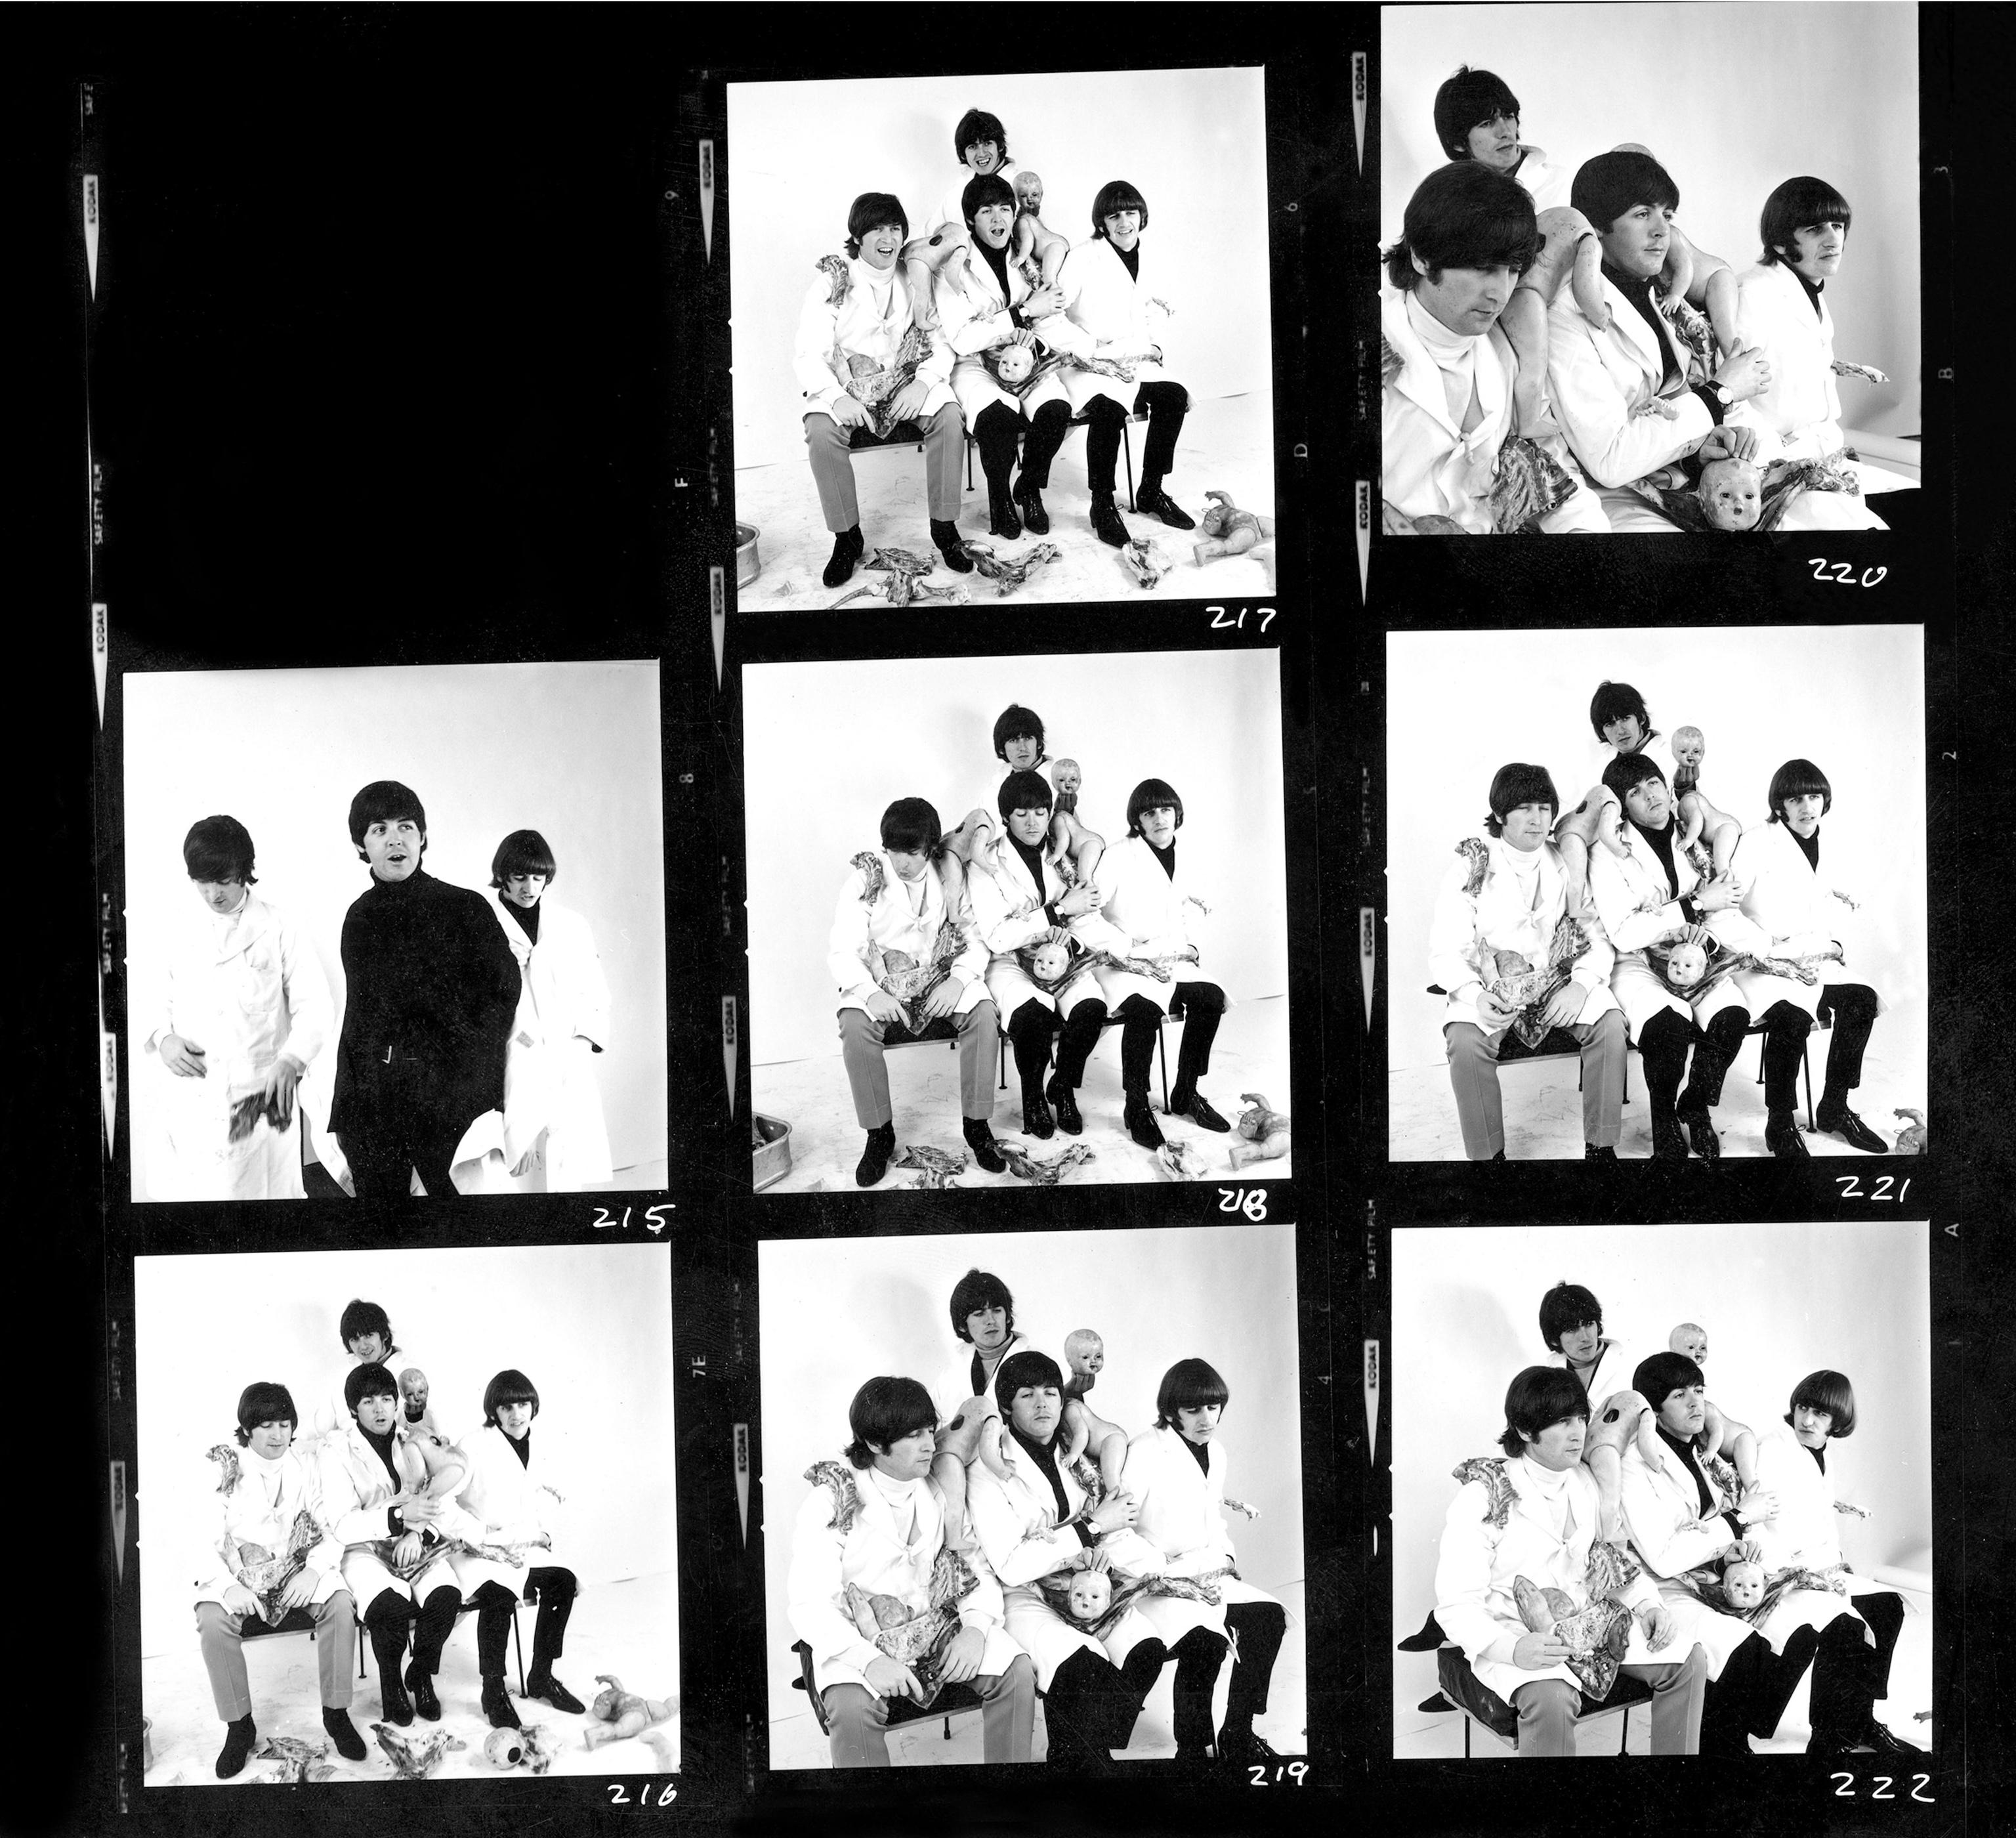  The Beatles contact sheet by Robert Whitaker from the photo session that ended up being the controversial cover for the 1966 release "Yesterday and Today". 

On March 25, 1966, The Beatles visited 1 The Vale, Chelsea, London, a top-floor studio